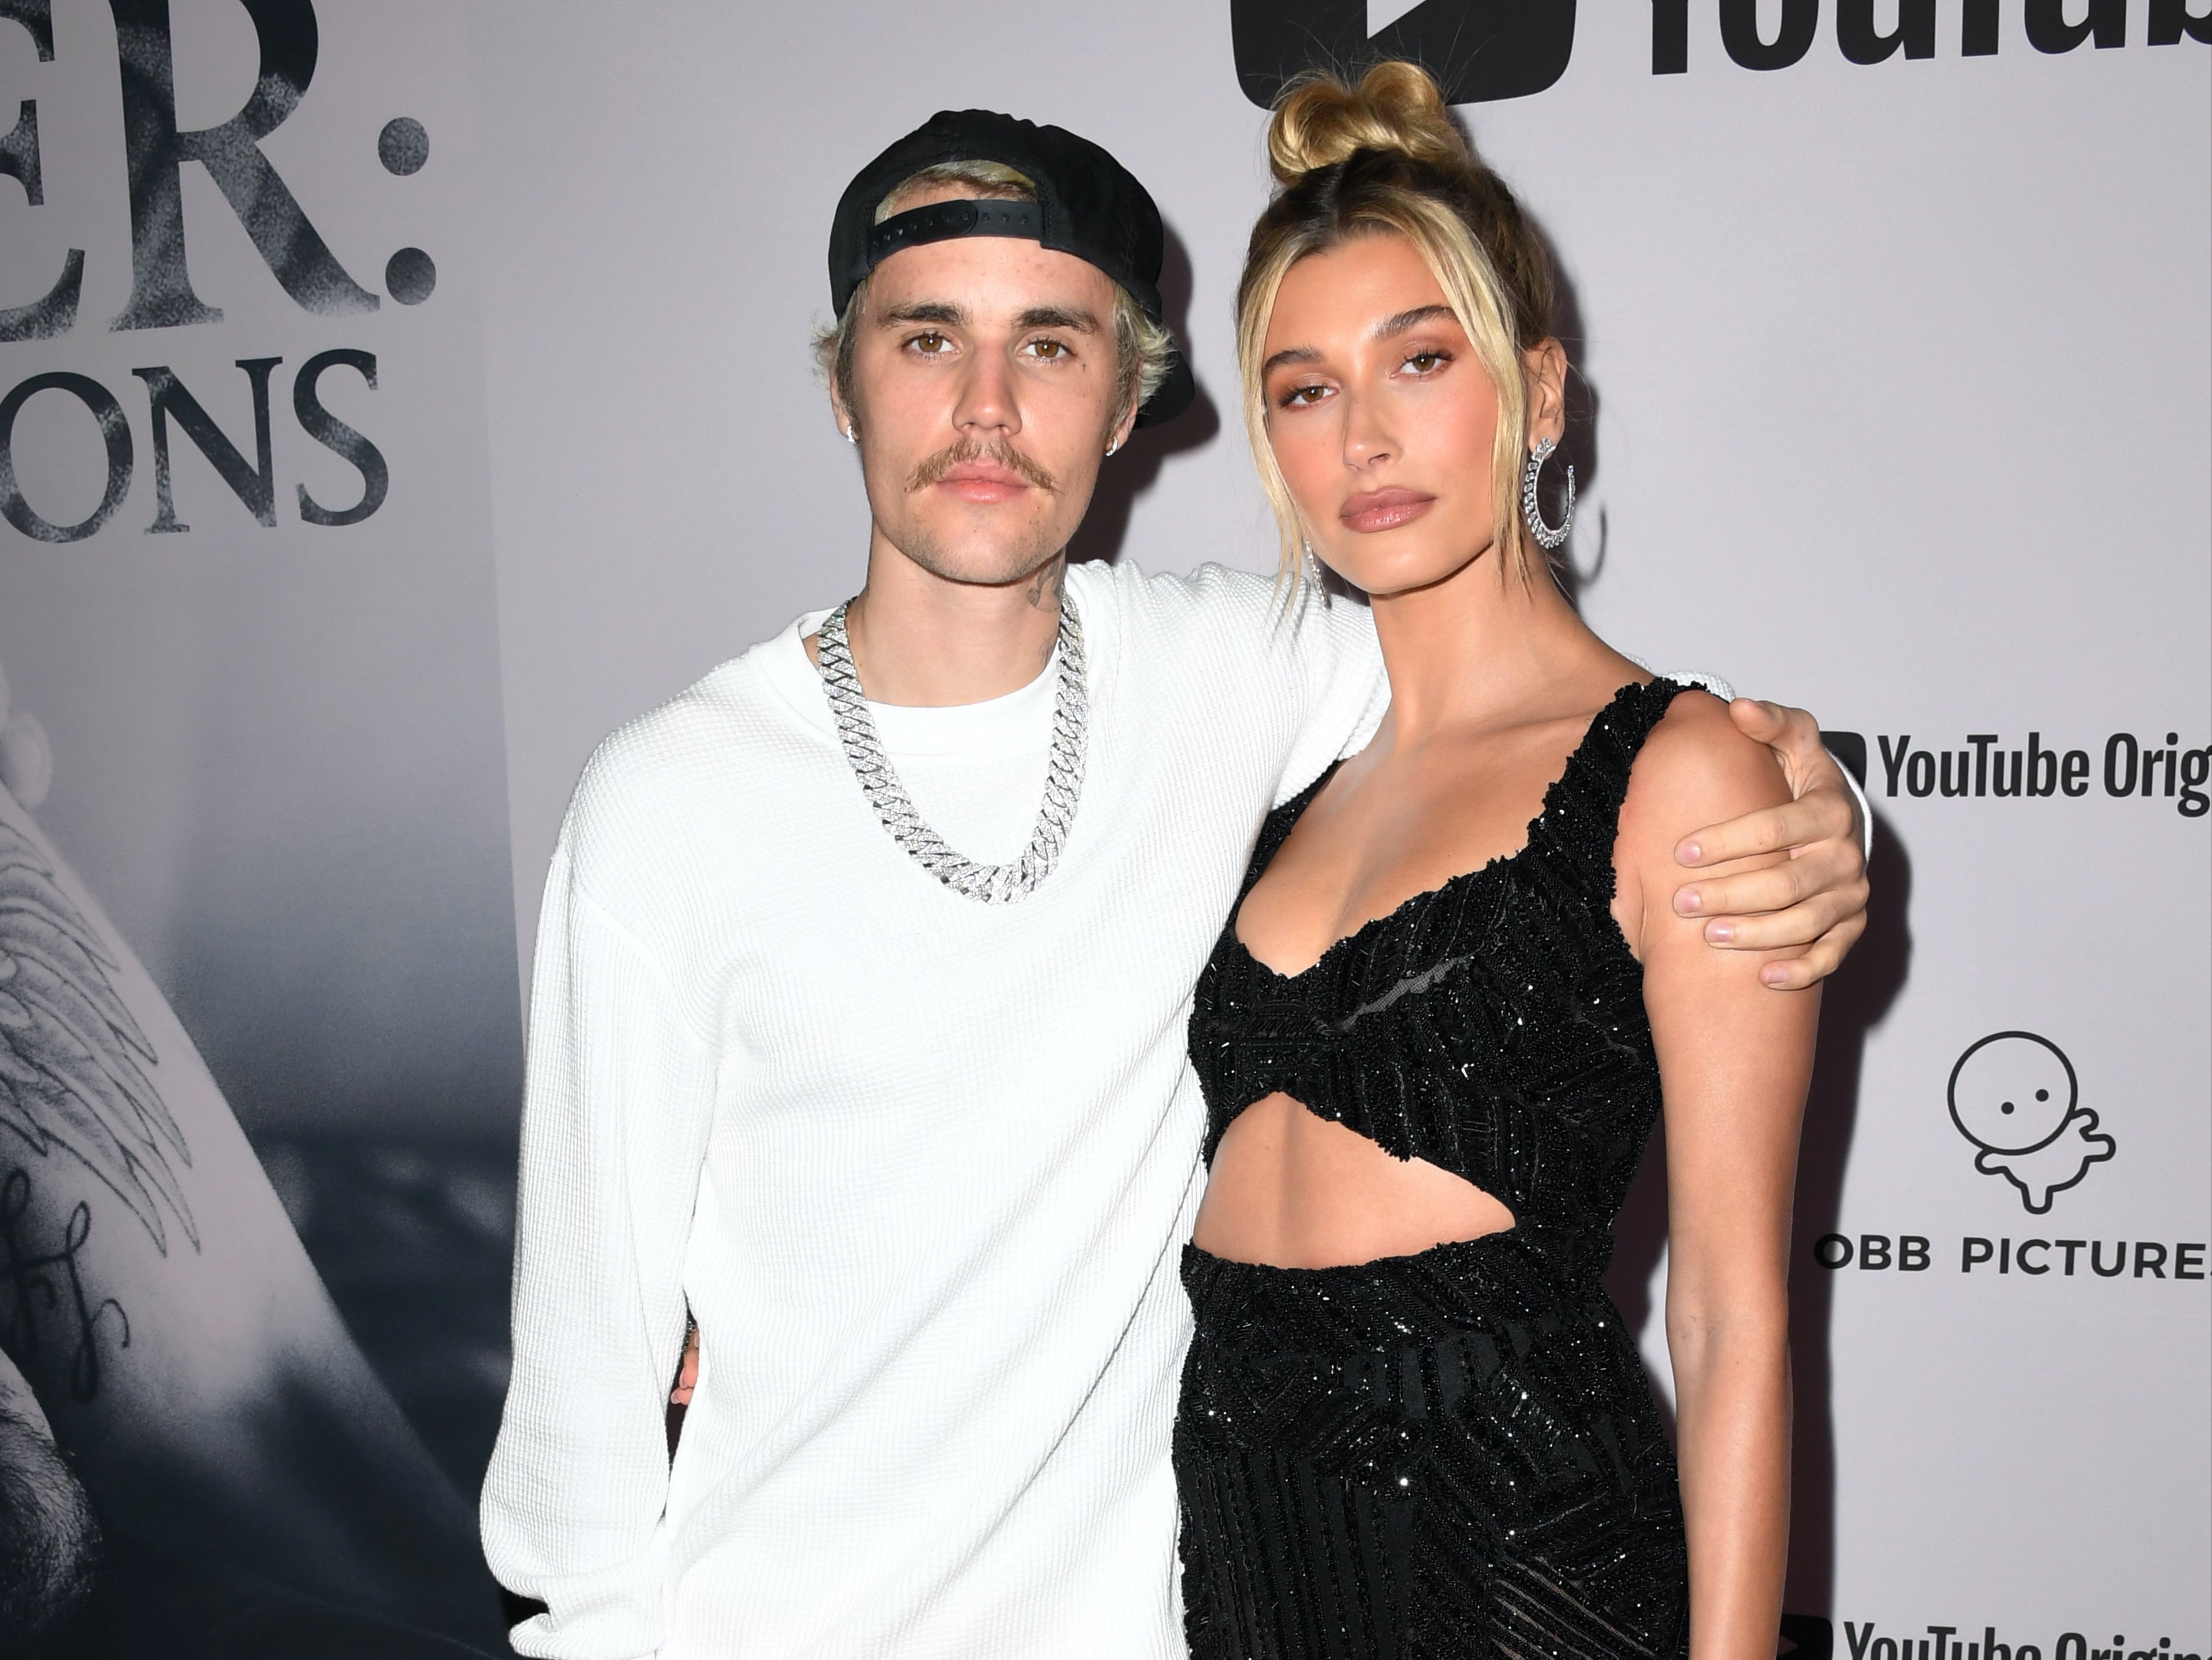 Hailey Bieber denies she is pregnant while calling out US Weekly